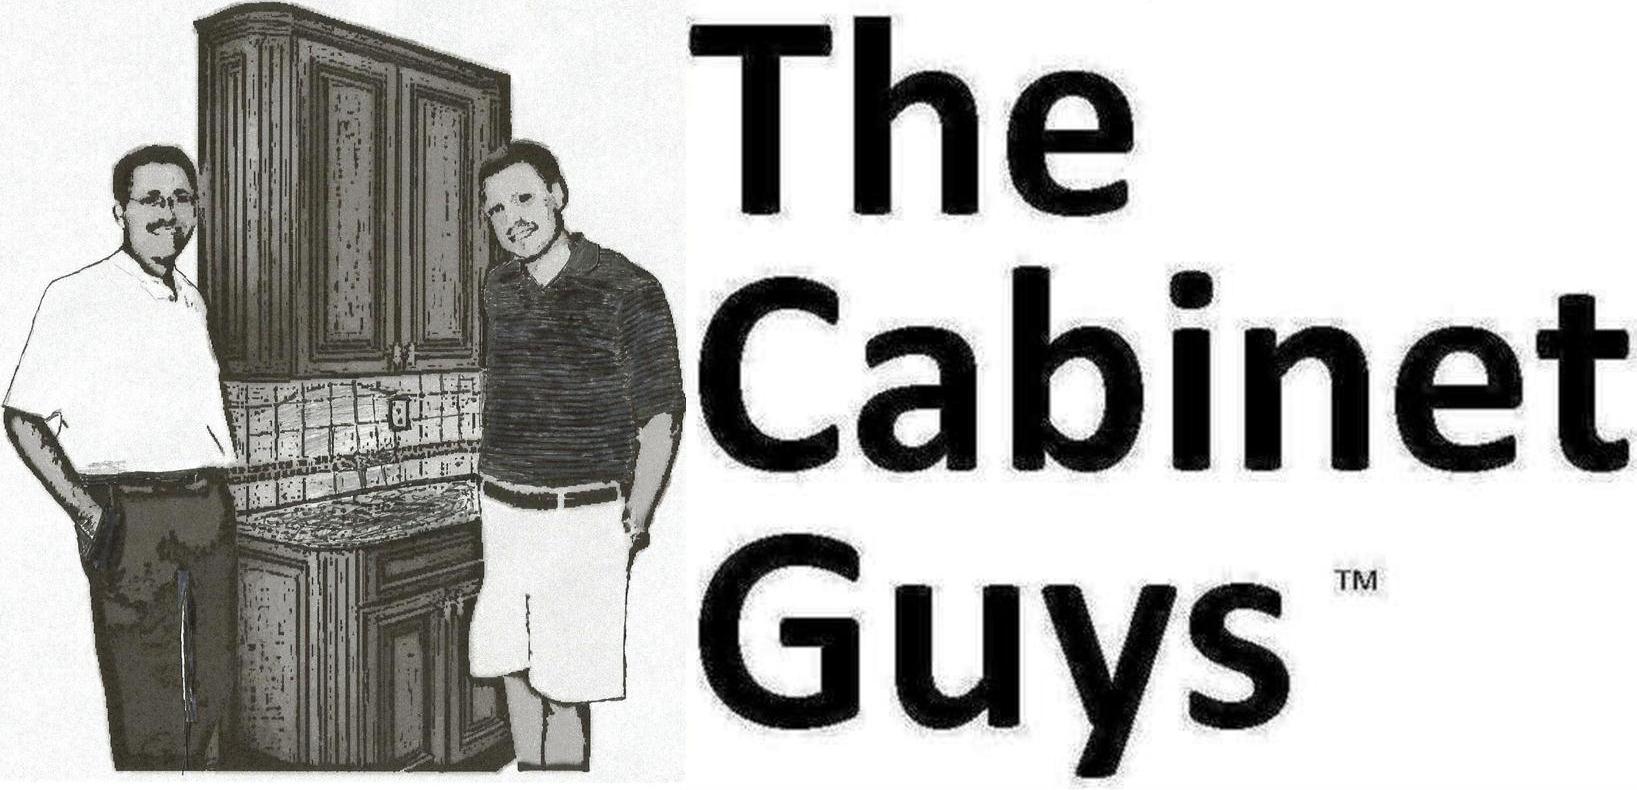 The Cabinet Guys Logo